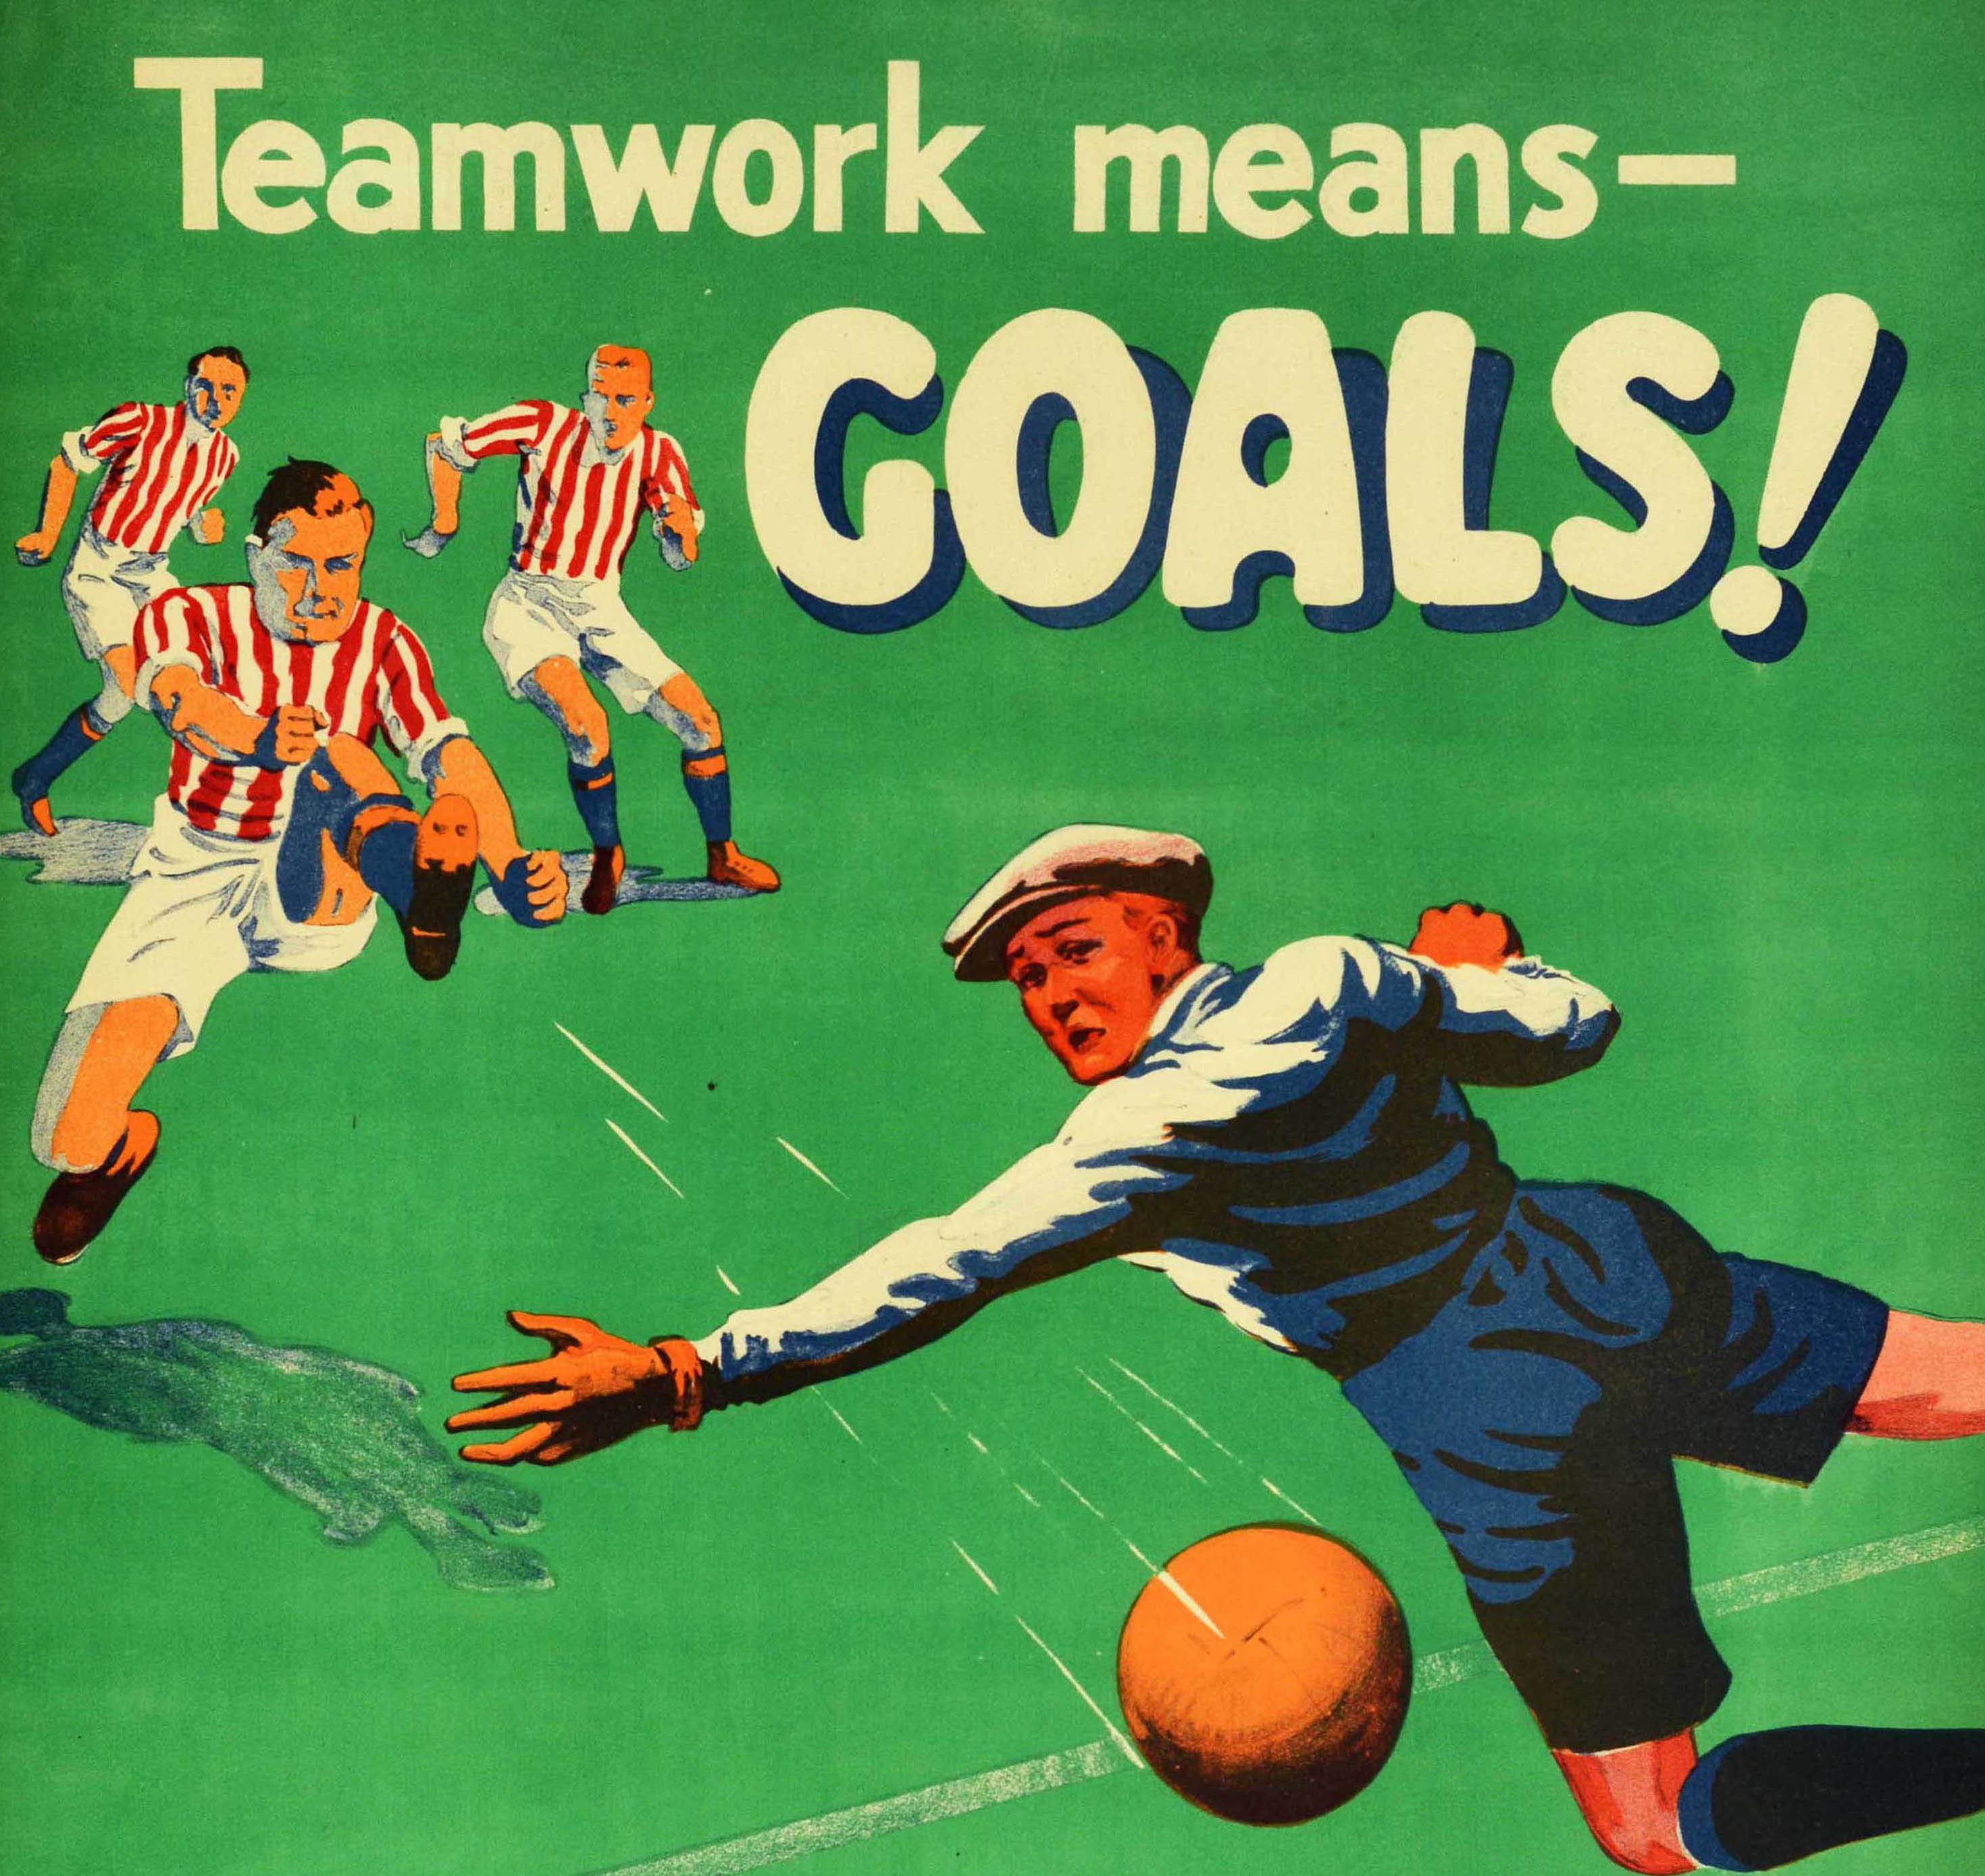 Original vintage workplace motivational poster - Teamwork means goals! Combined effort seldom loses Join in Help win Be in Bill Jones - featuring a dynamic and colourful image of a football match showing the team in red and white tops working